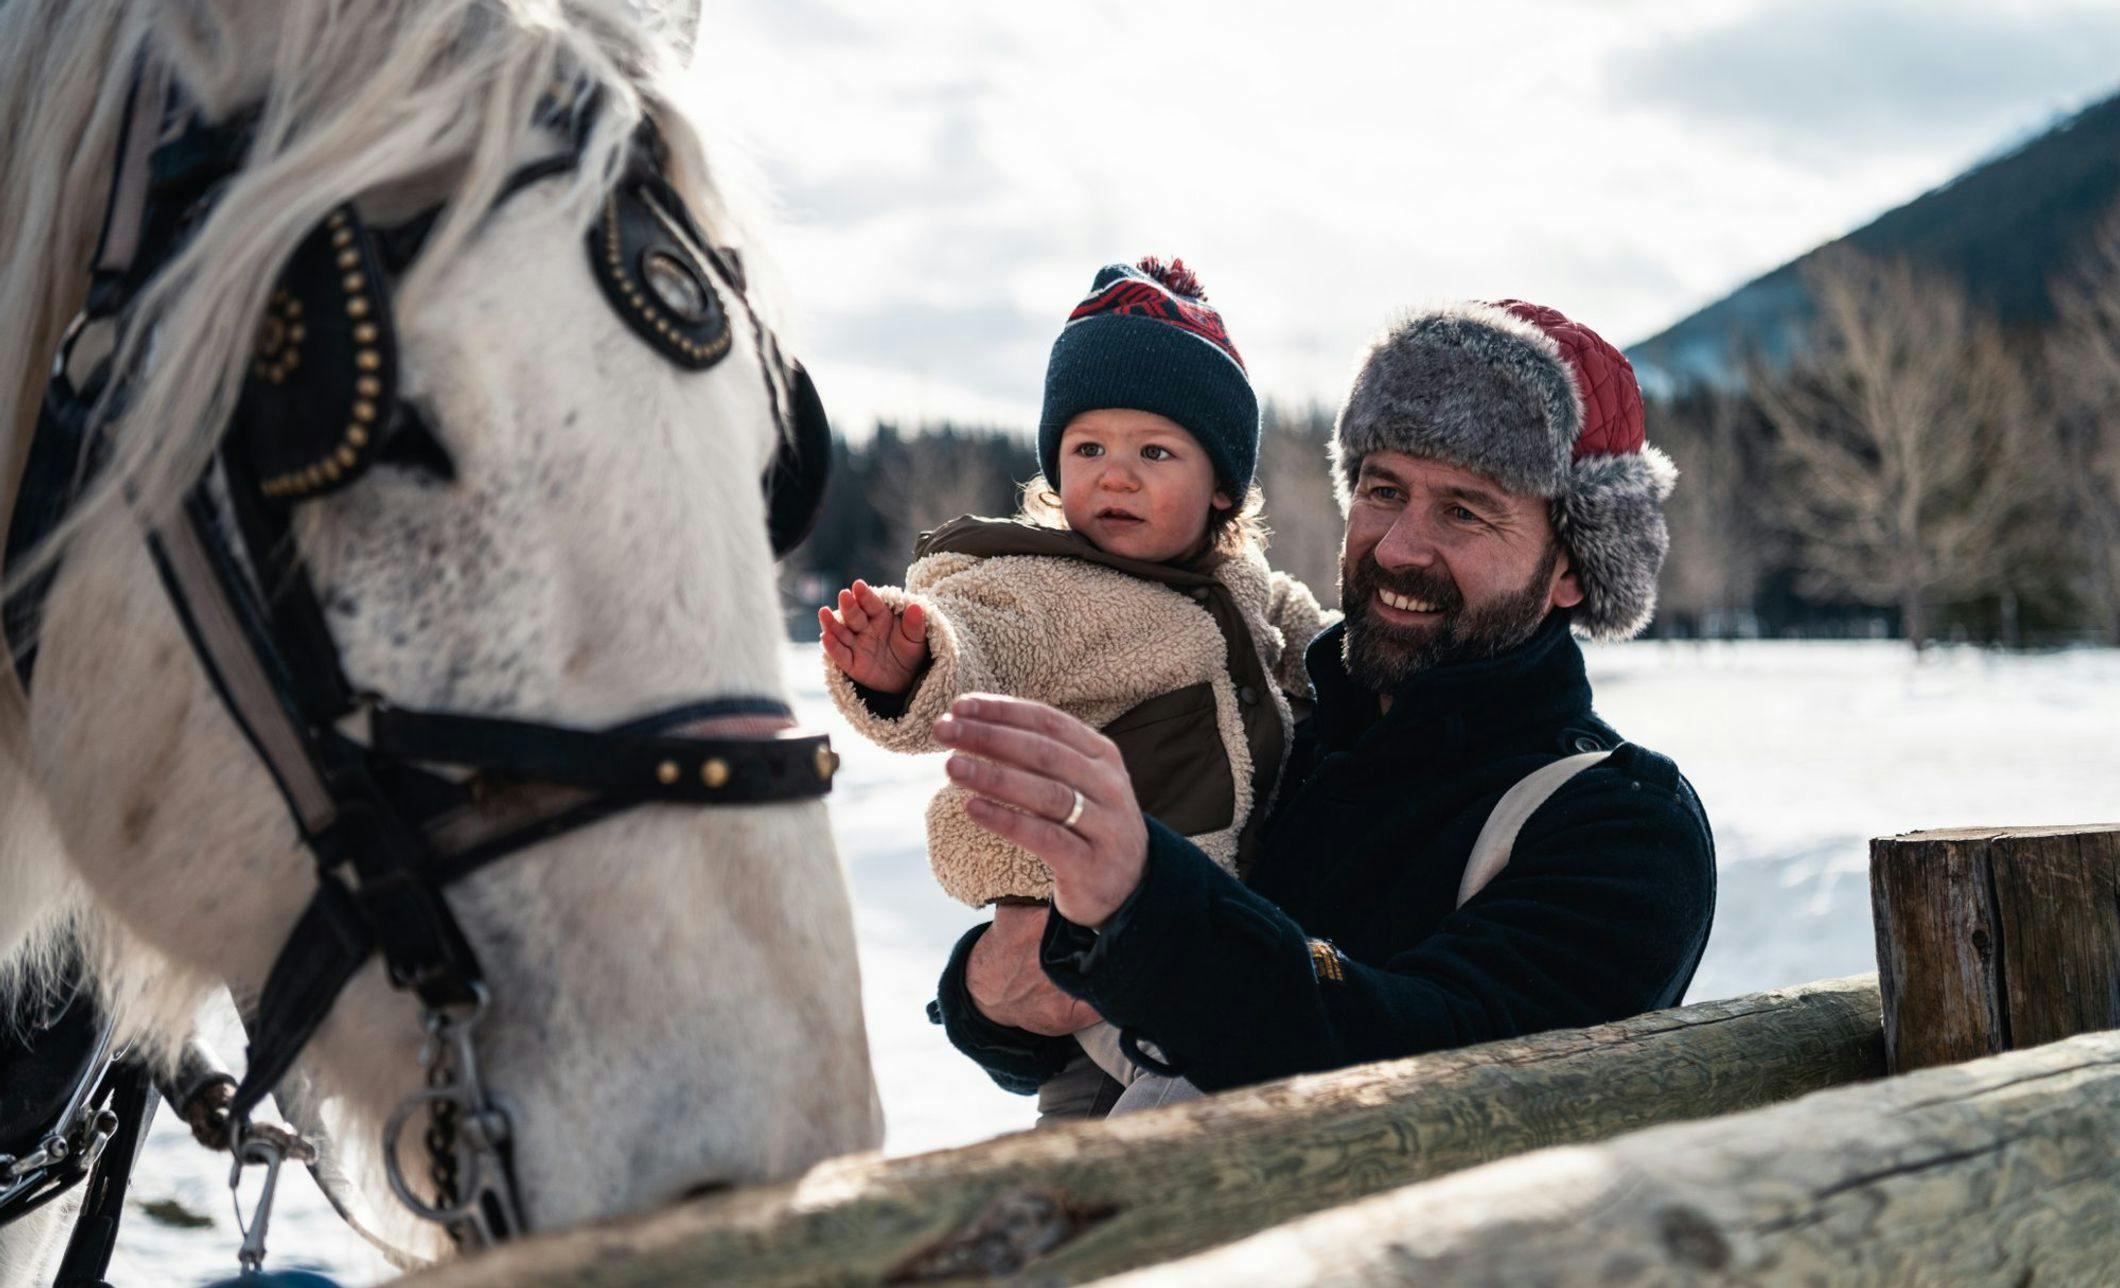 A father and a young baby are bundled up outside in the winter next to a large horse that will pull them in a sleigh